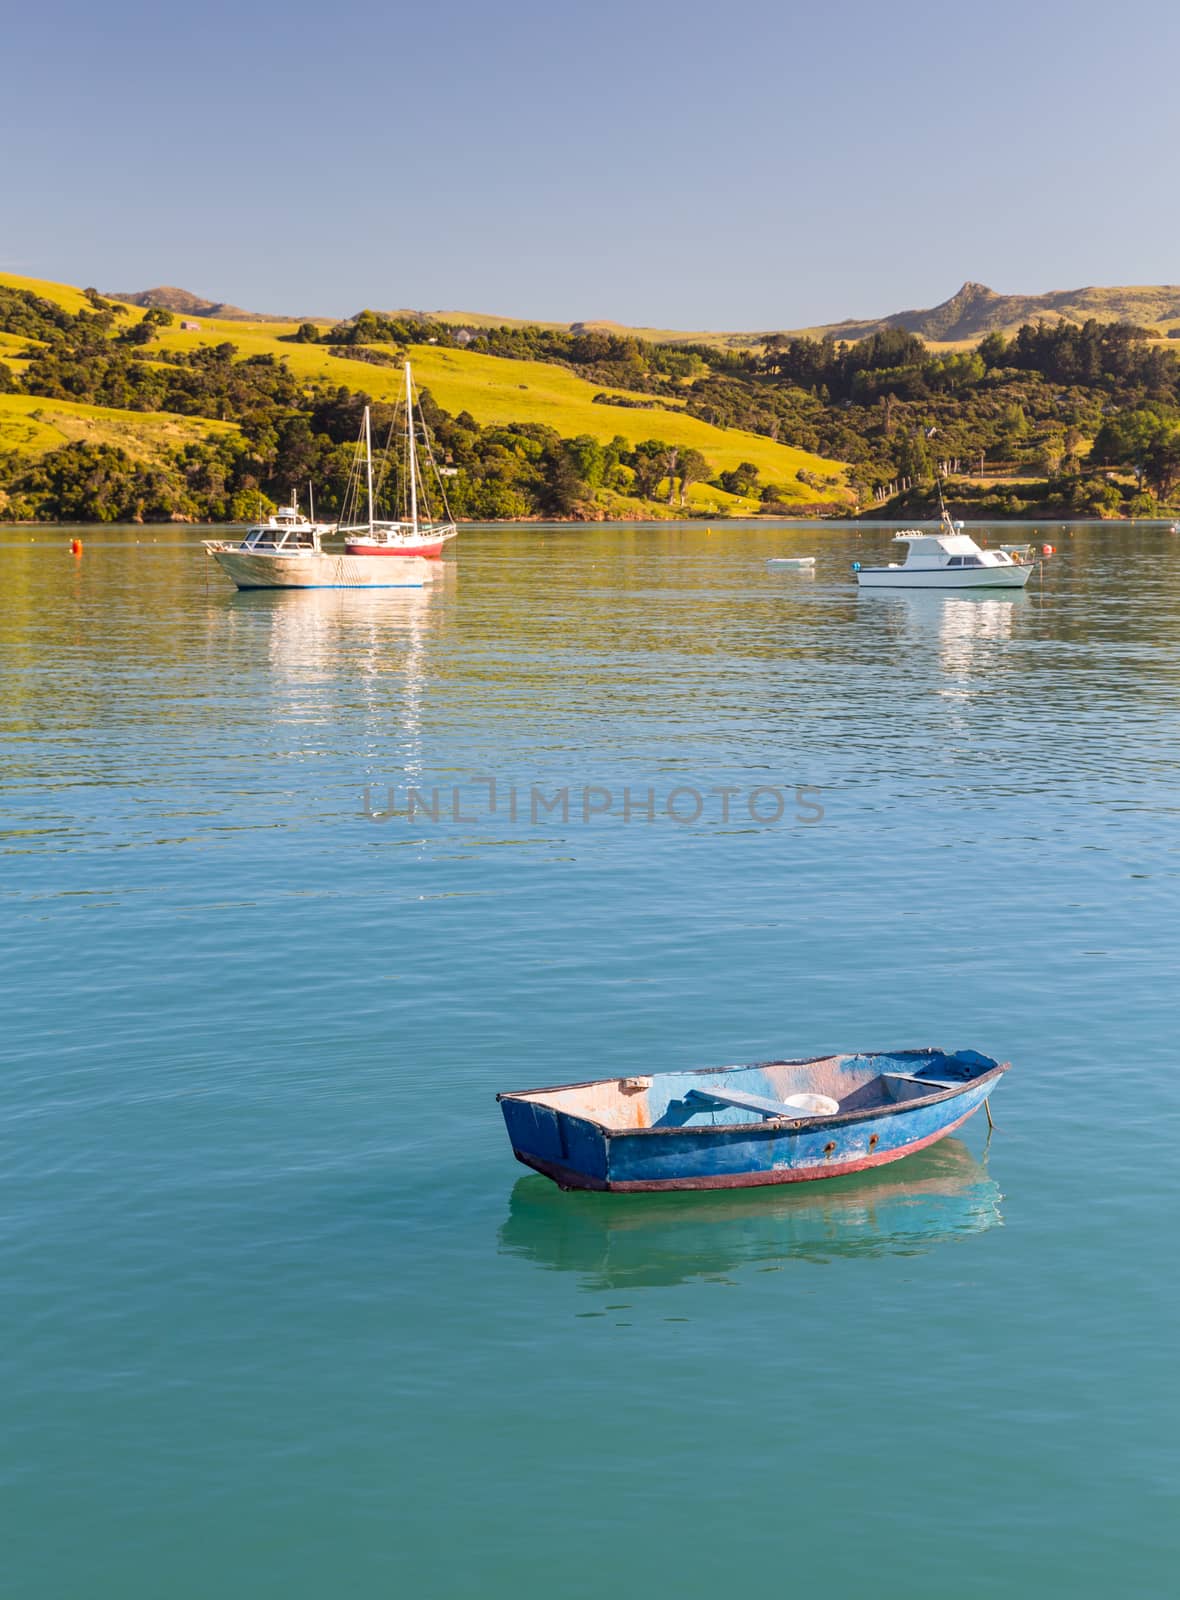 Old weathered blue rowing boat moored in Akaroa Harbor in New Zealand with other yachts in the background